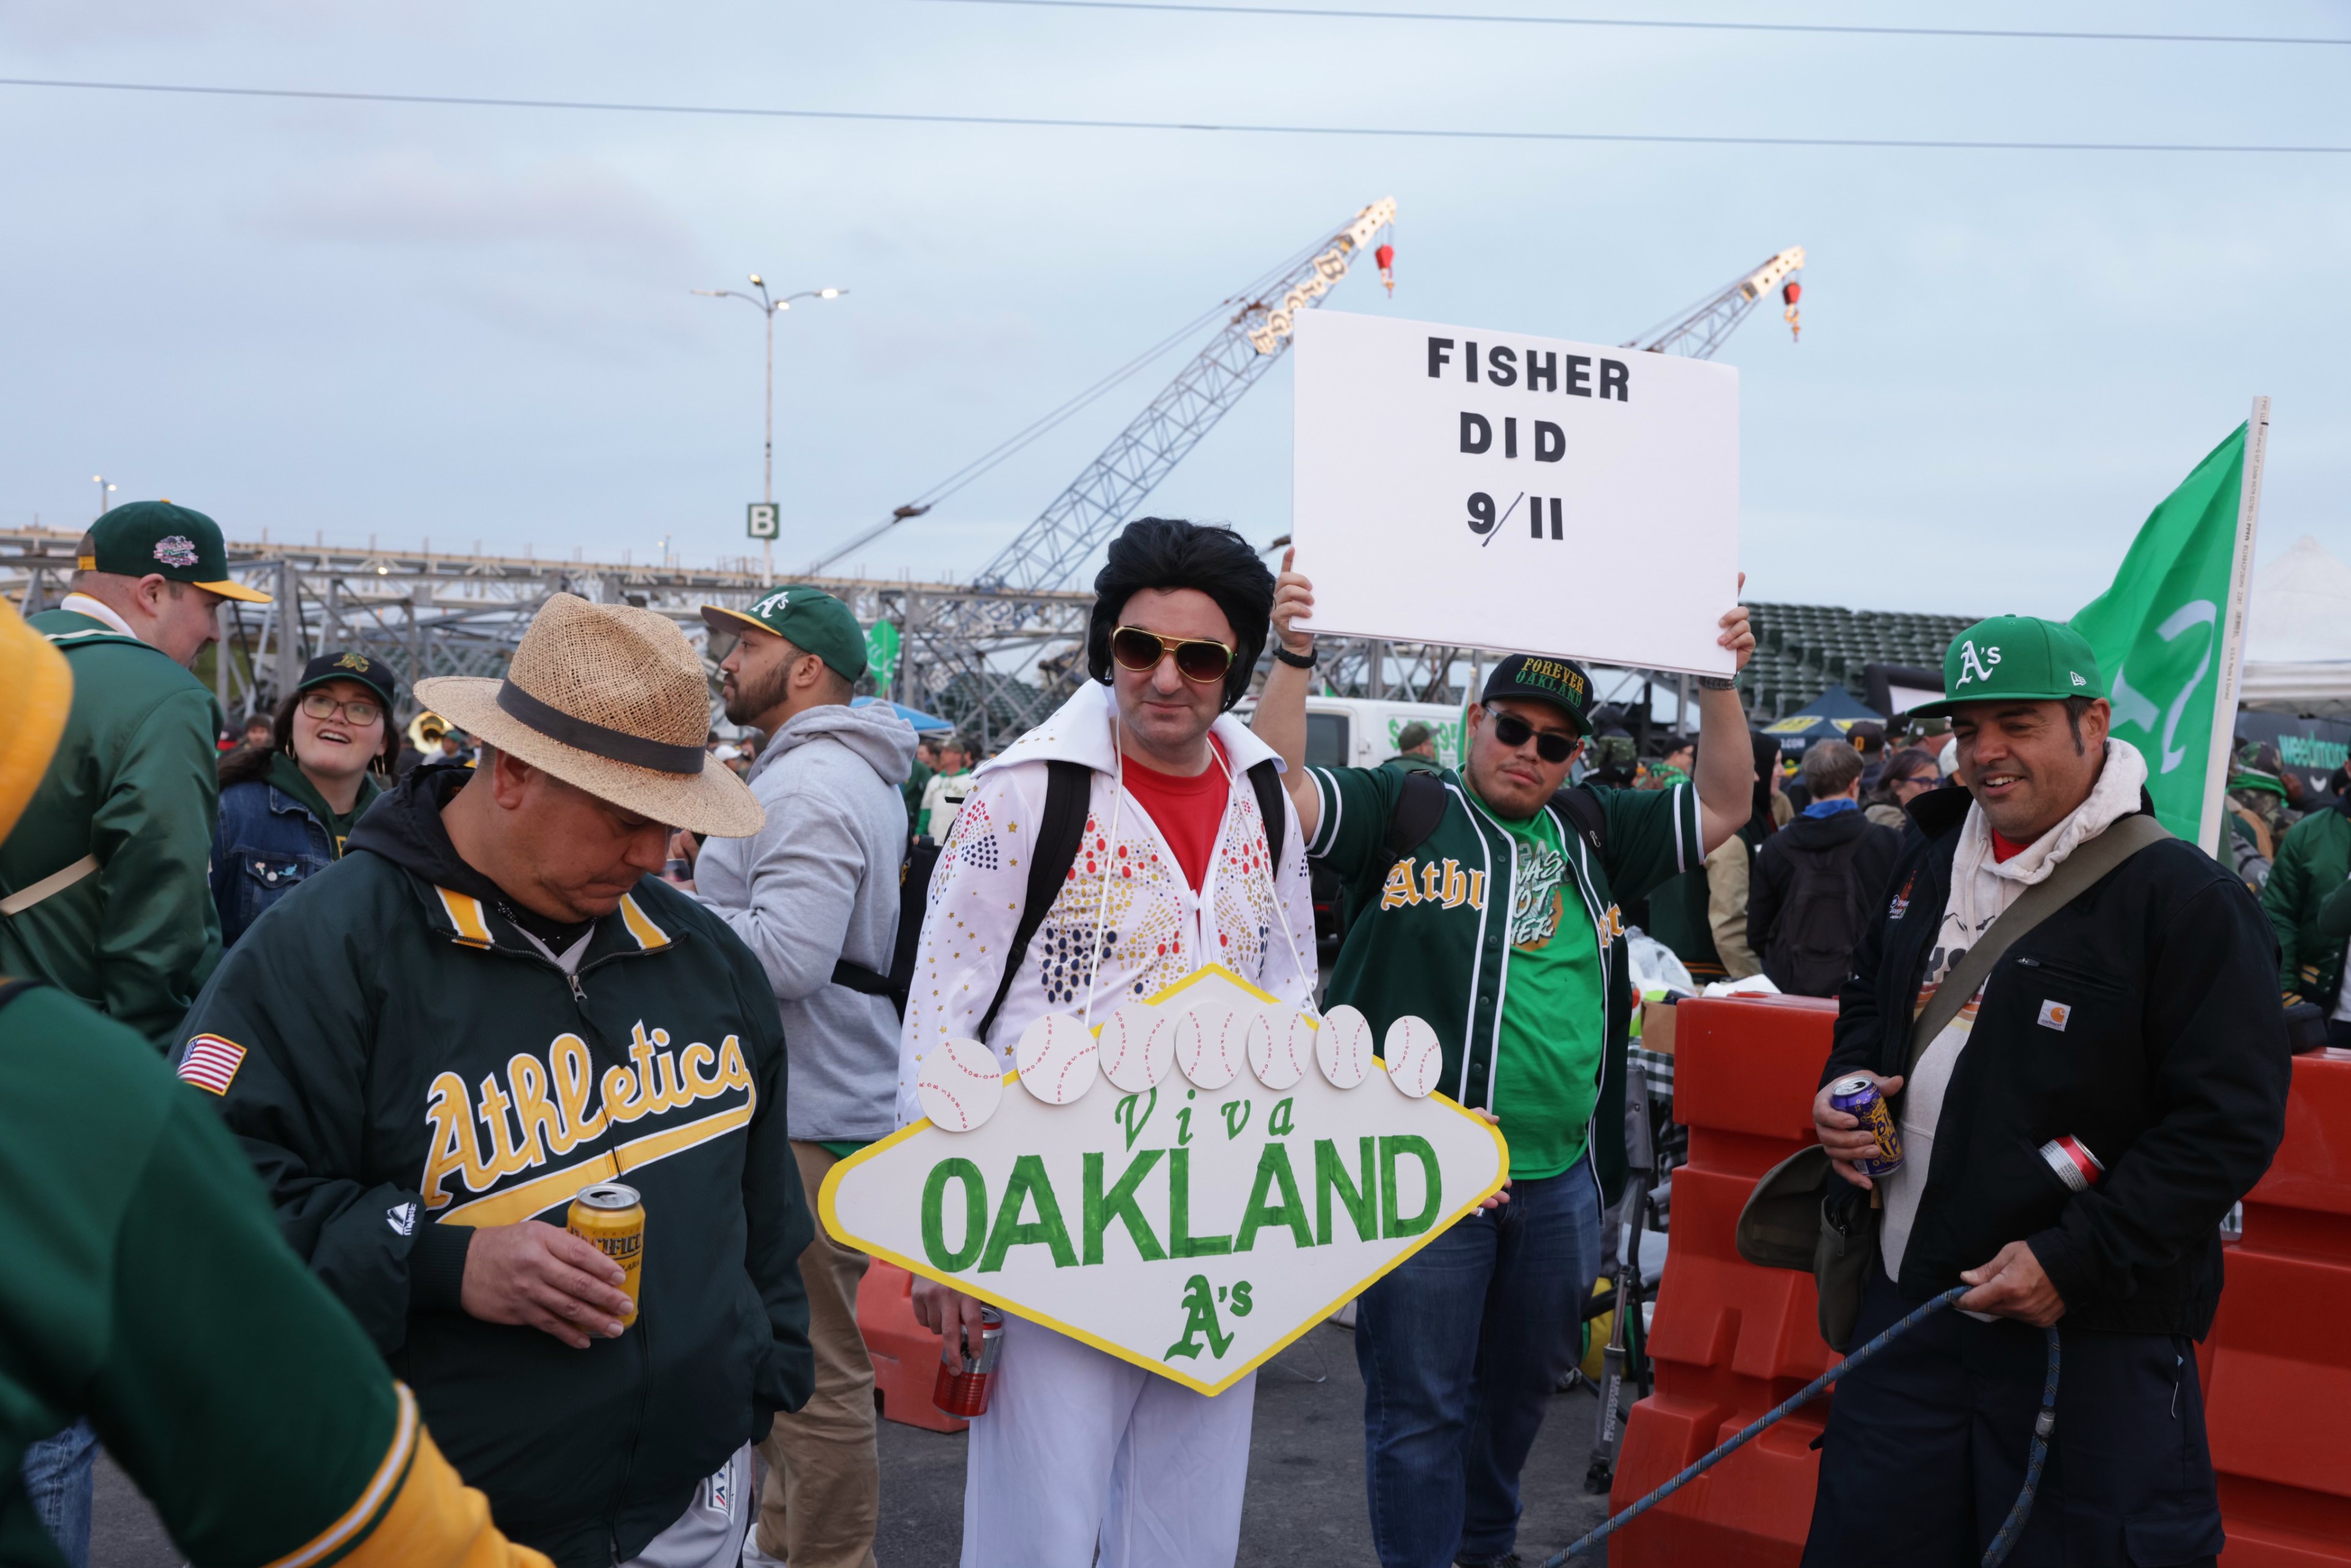 Baseball fans in A's gear, one dressed as Elvis holding a &quot;Viva Oakland&quot; sign, others chatting with drinks, and a bridge in the background.